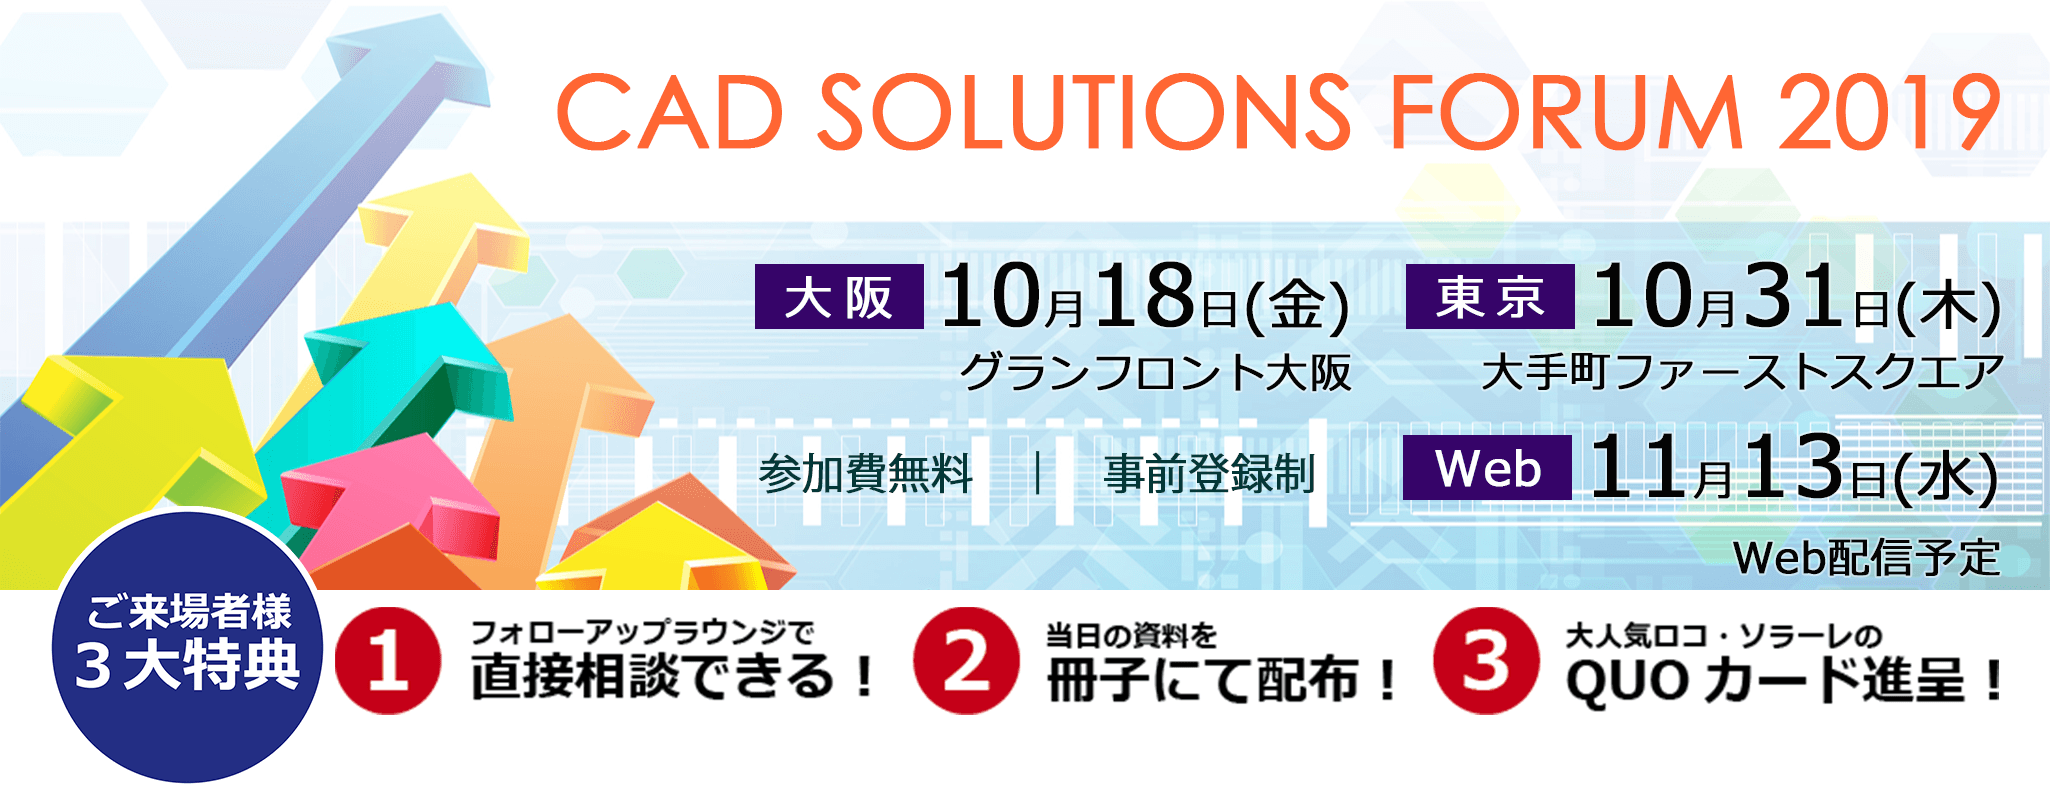 CAD SOLUTIONS FORUM 2019 Image